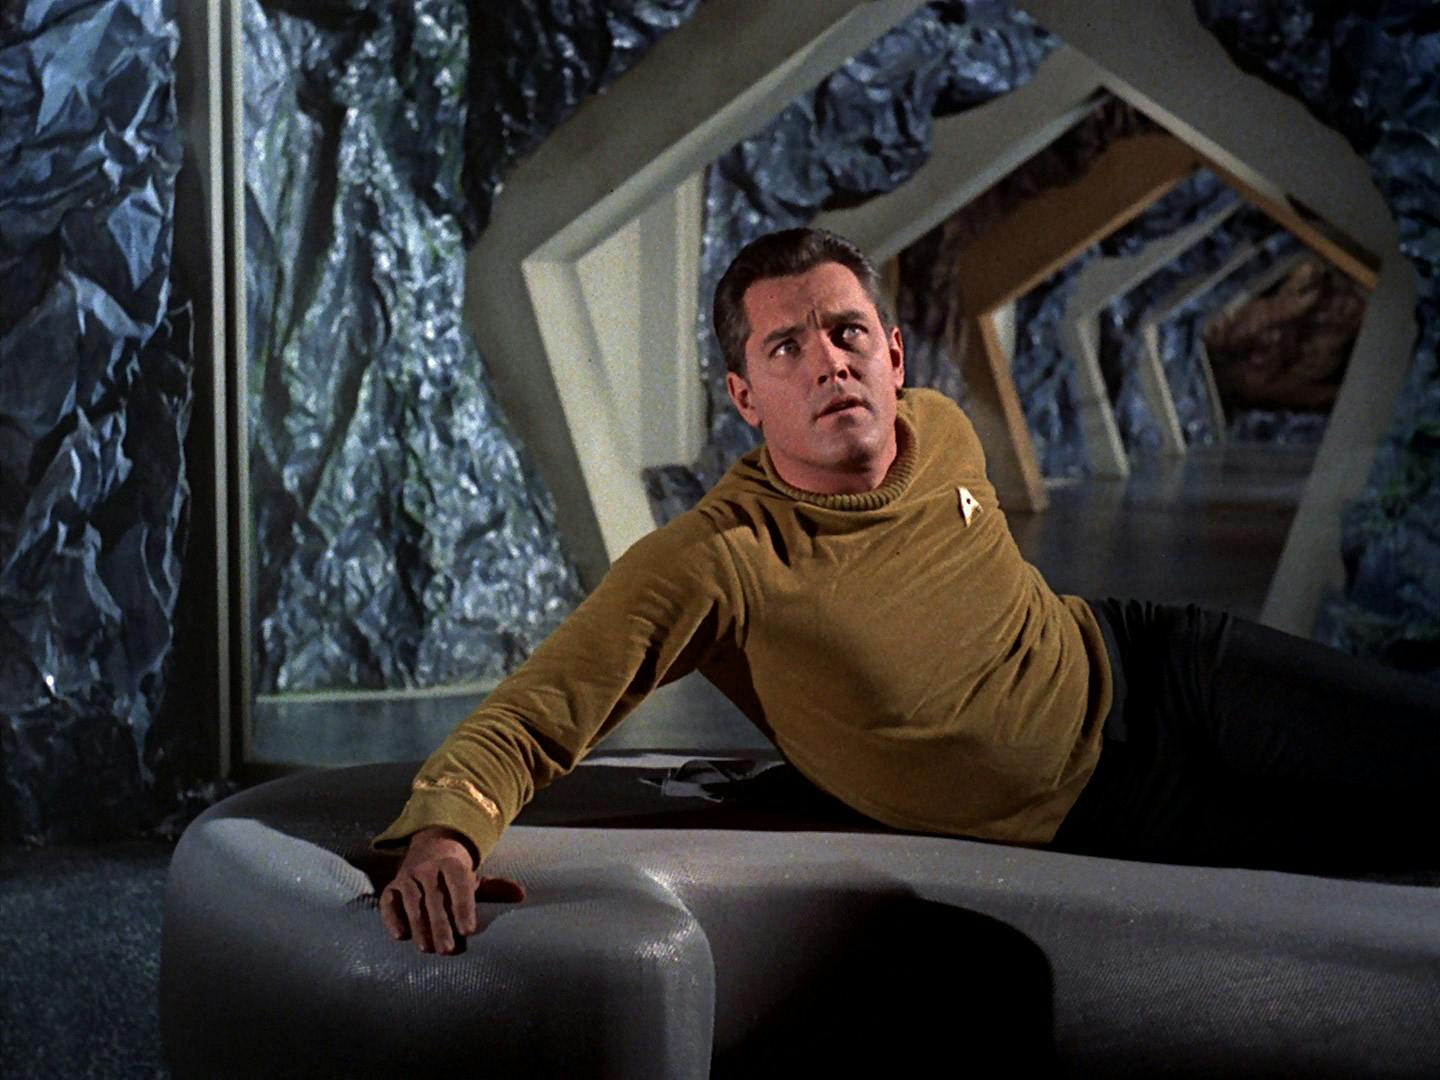 Captain Pike wakes up disoriented and confused as a captive of the Talosians in 'The Cage'